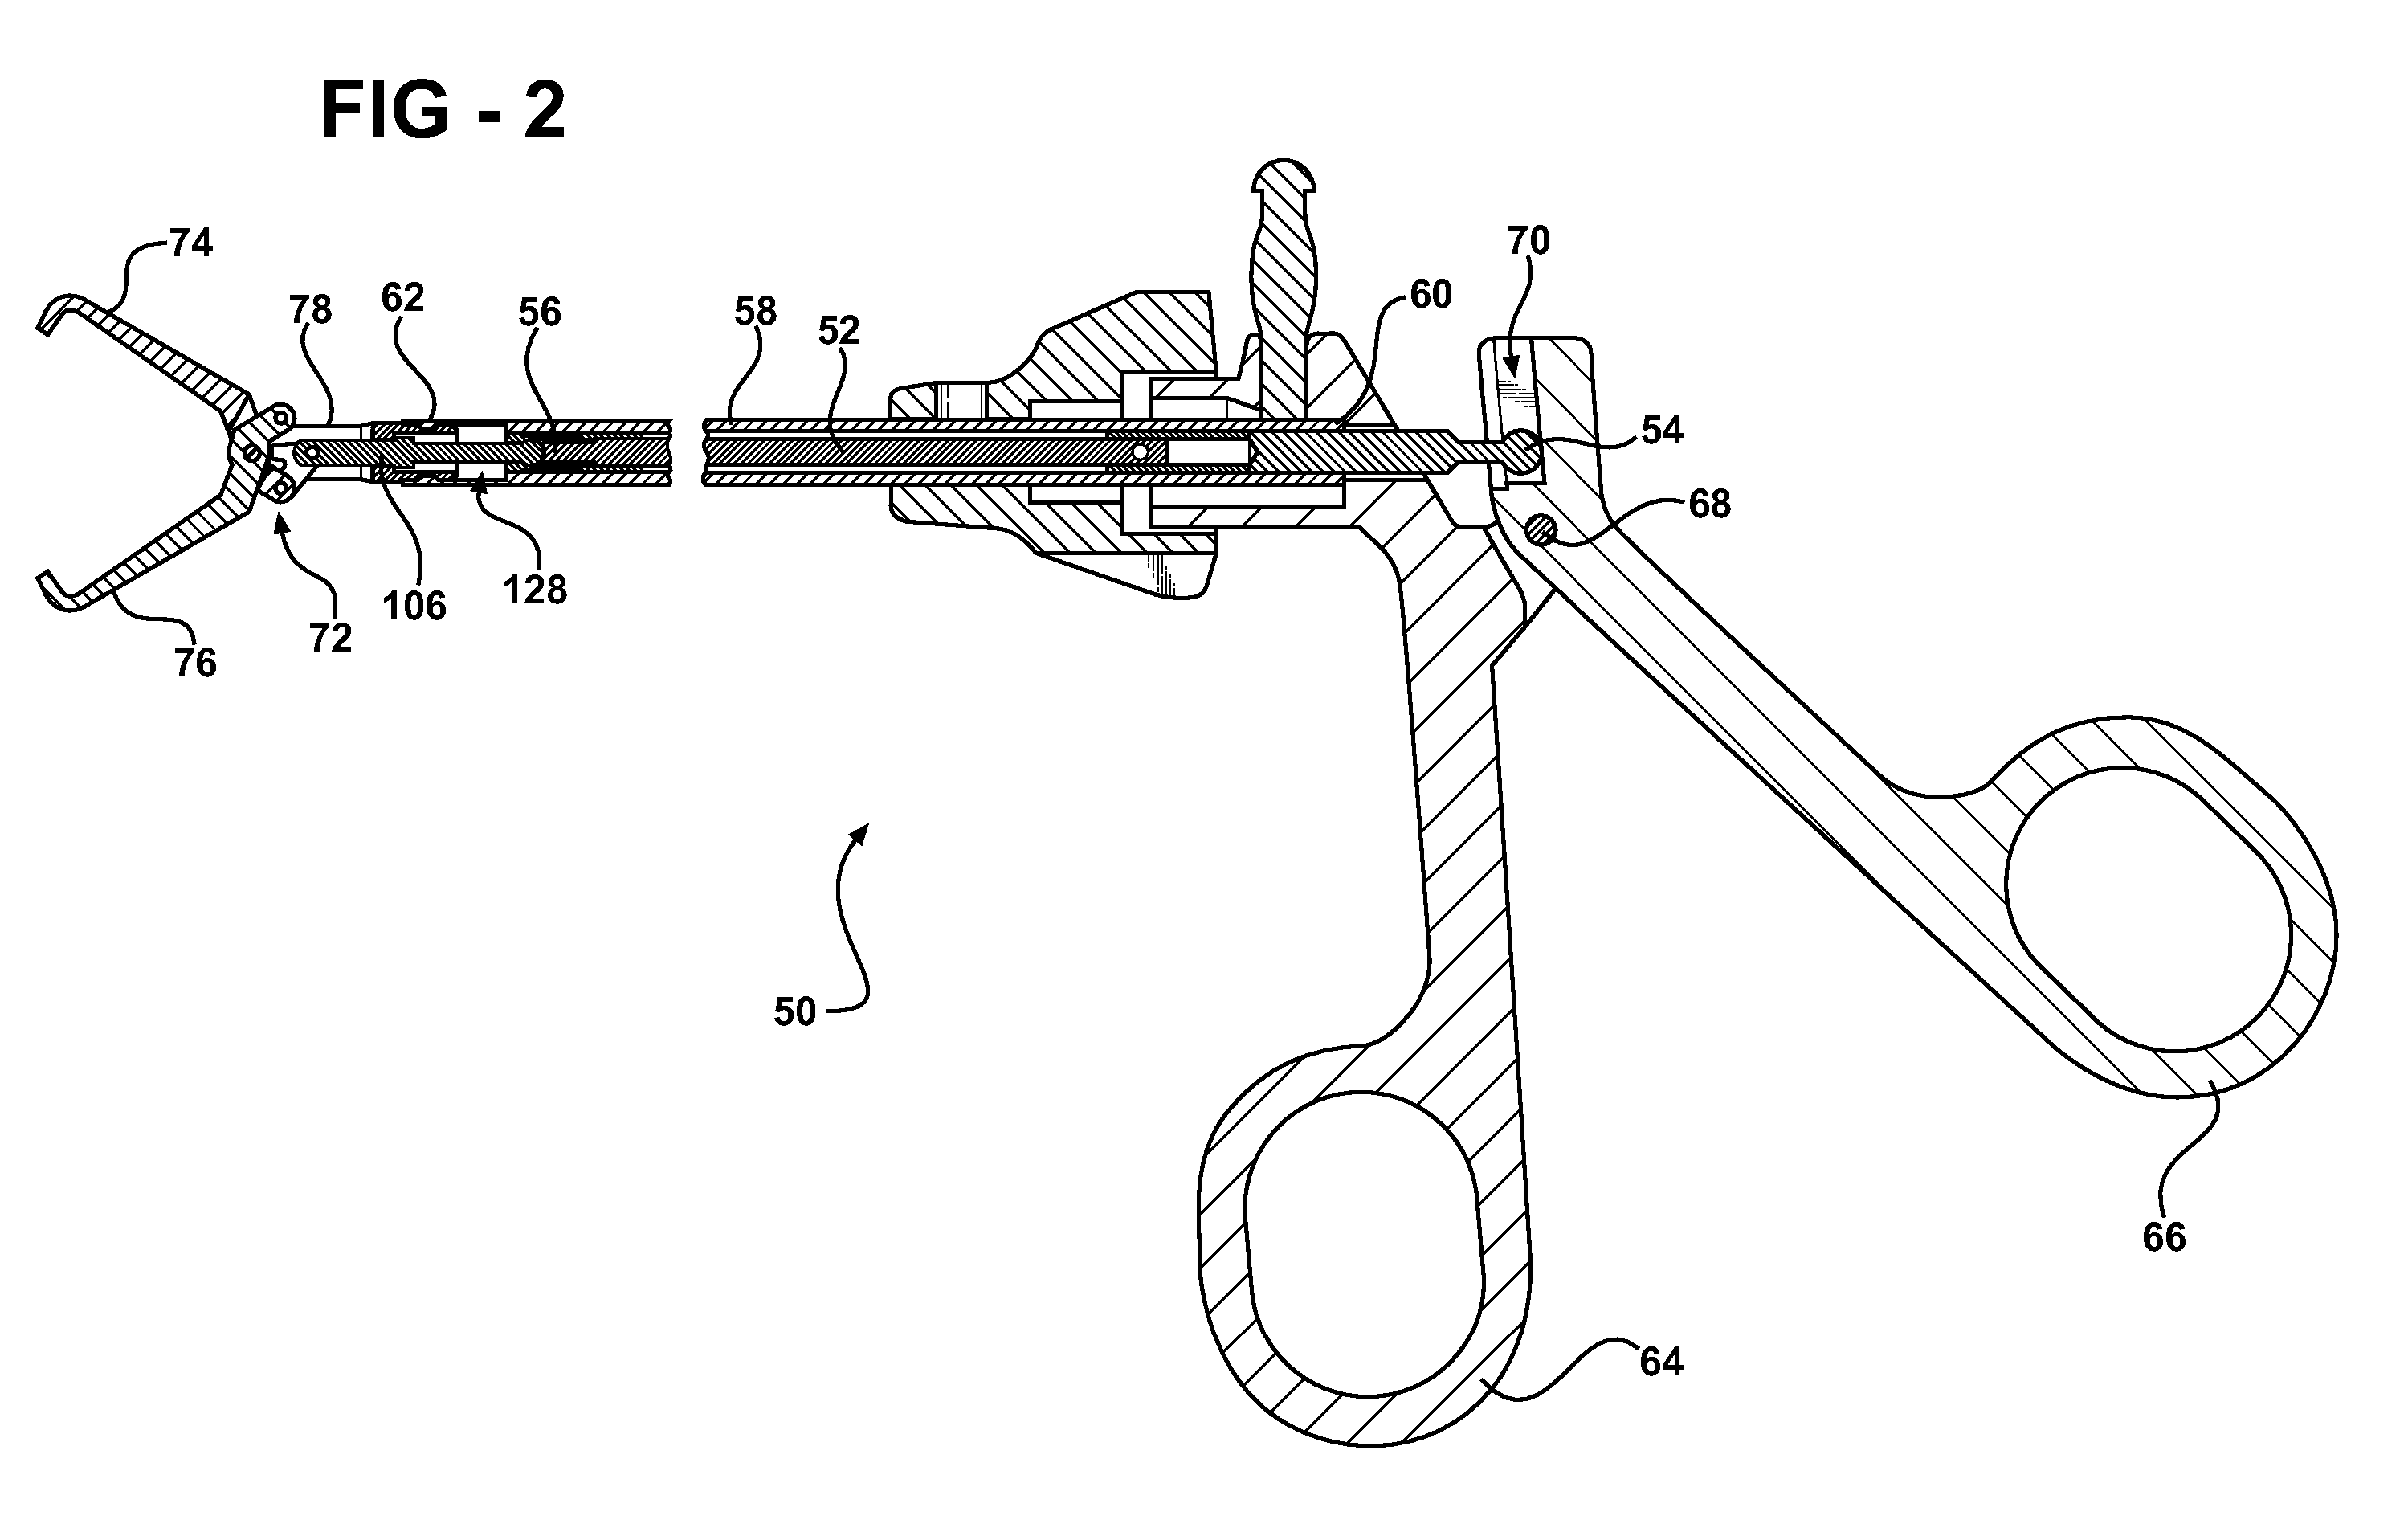 Surgical instrument with detachable tool assembly